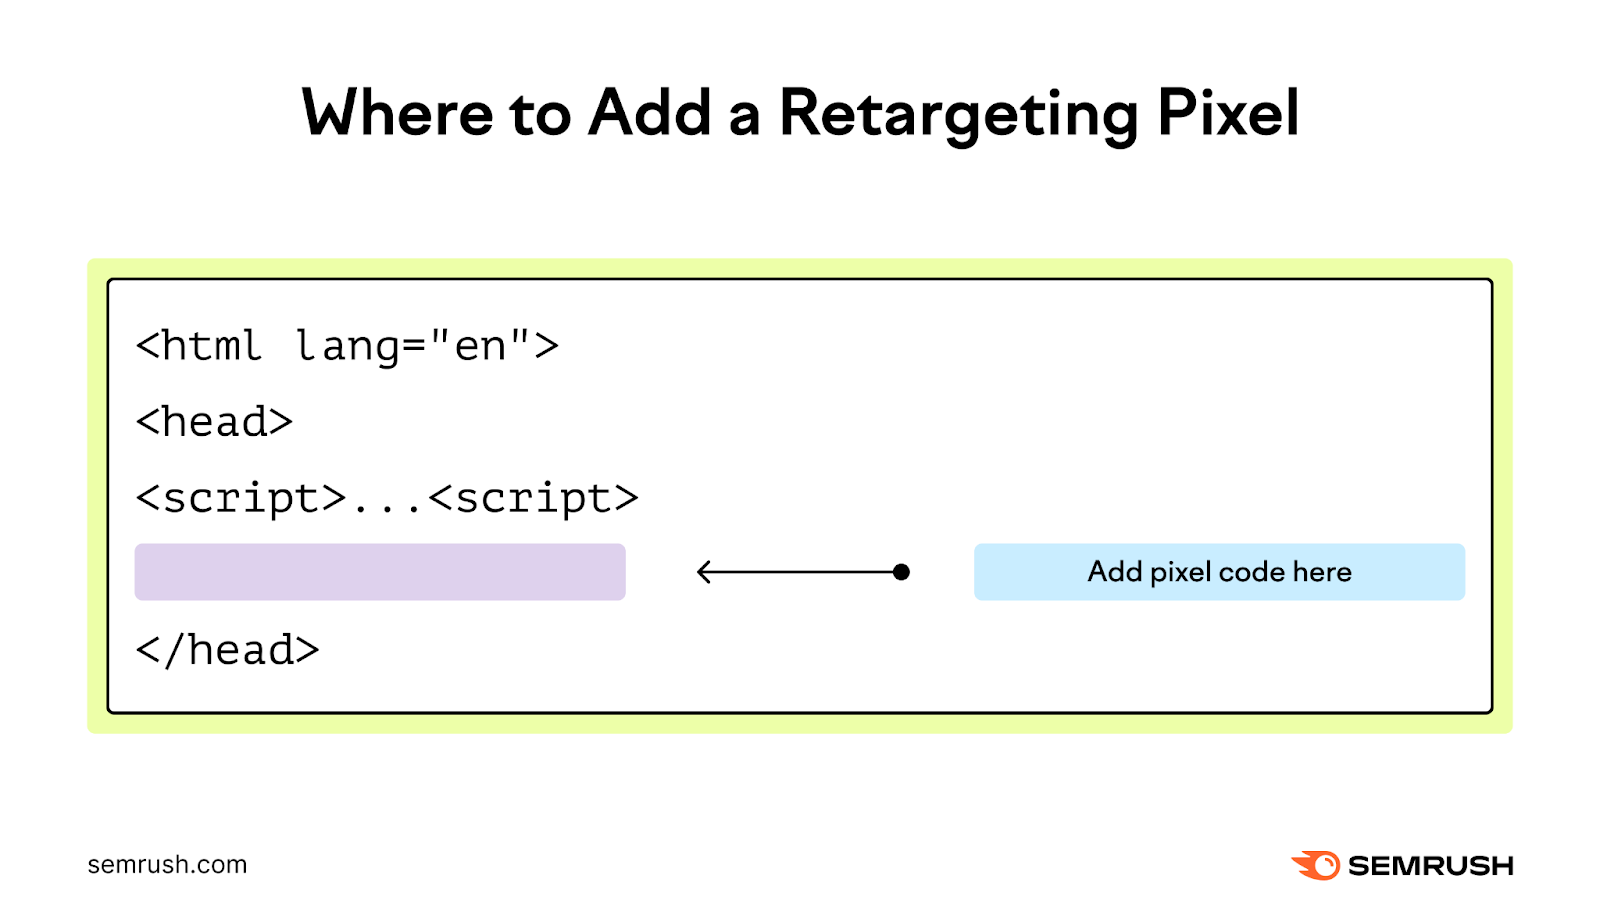 Where to add a retargeting pixel